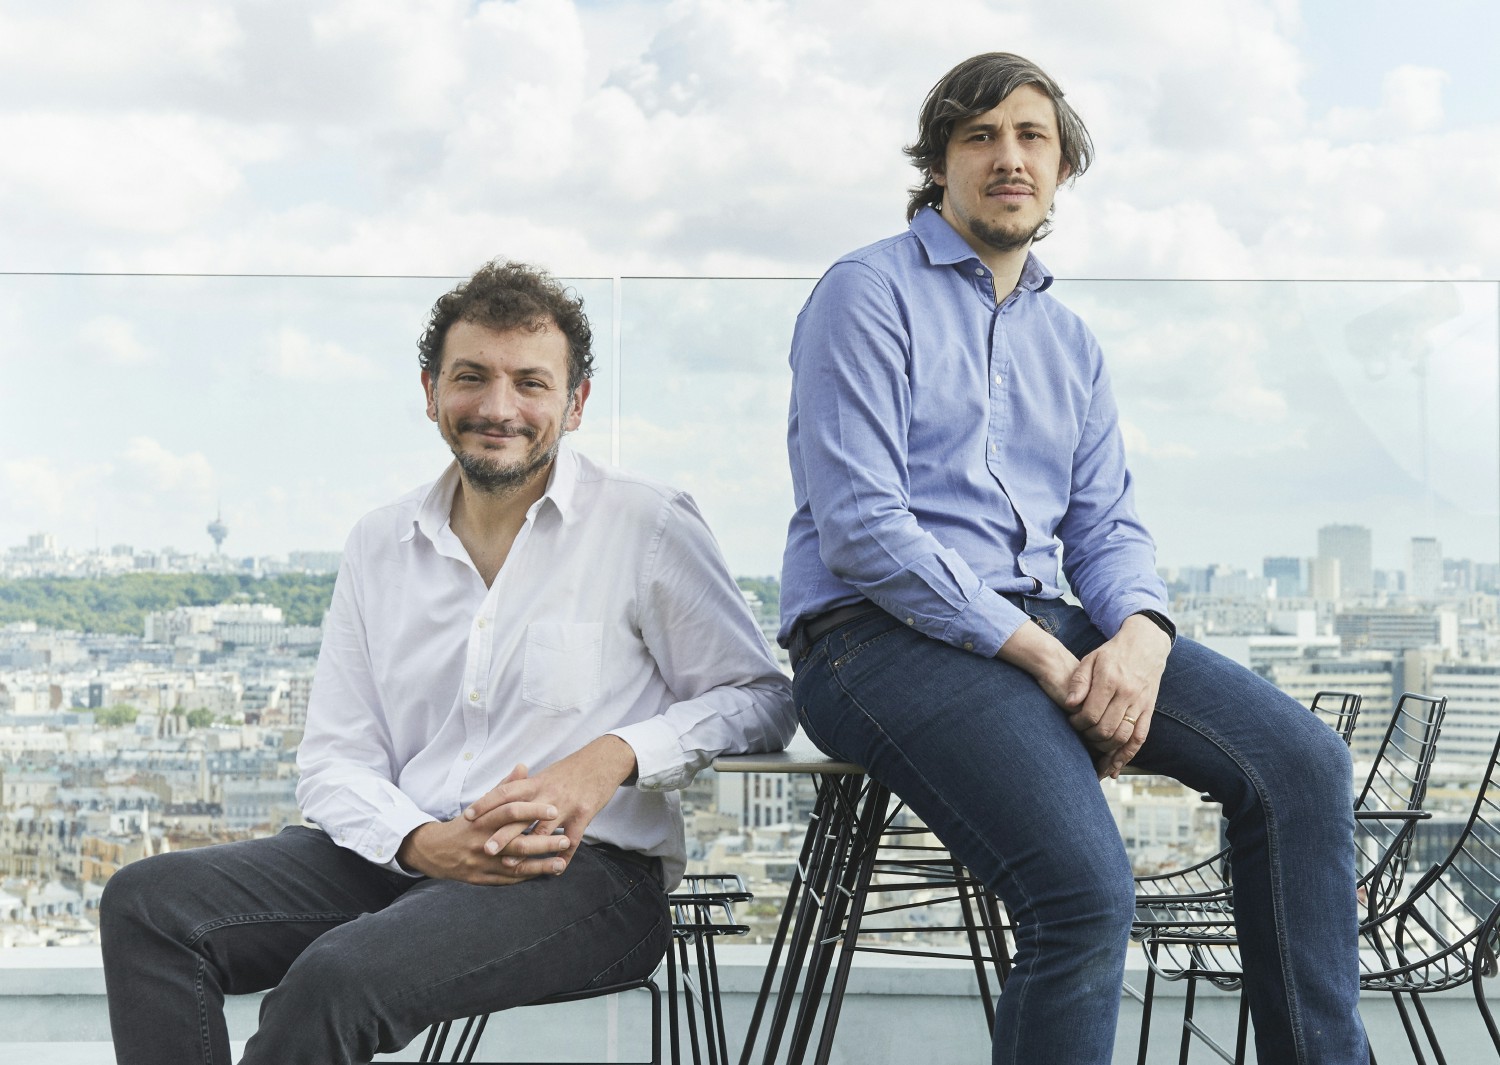 Our founders: CEO Florian Douetteau and CTO Clément Stenac